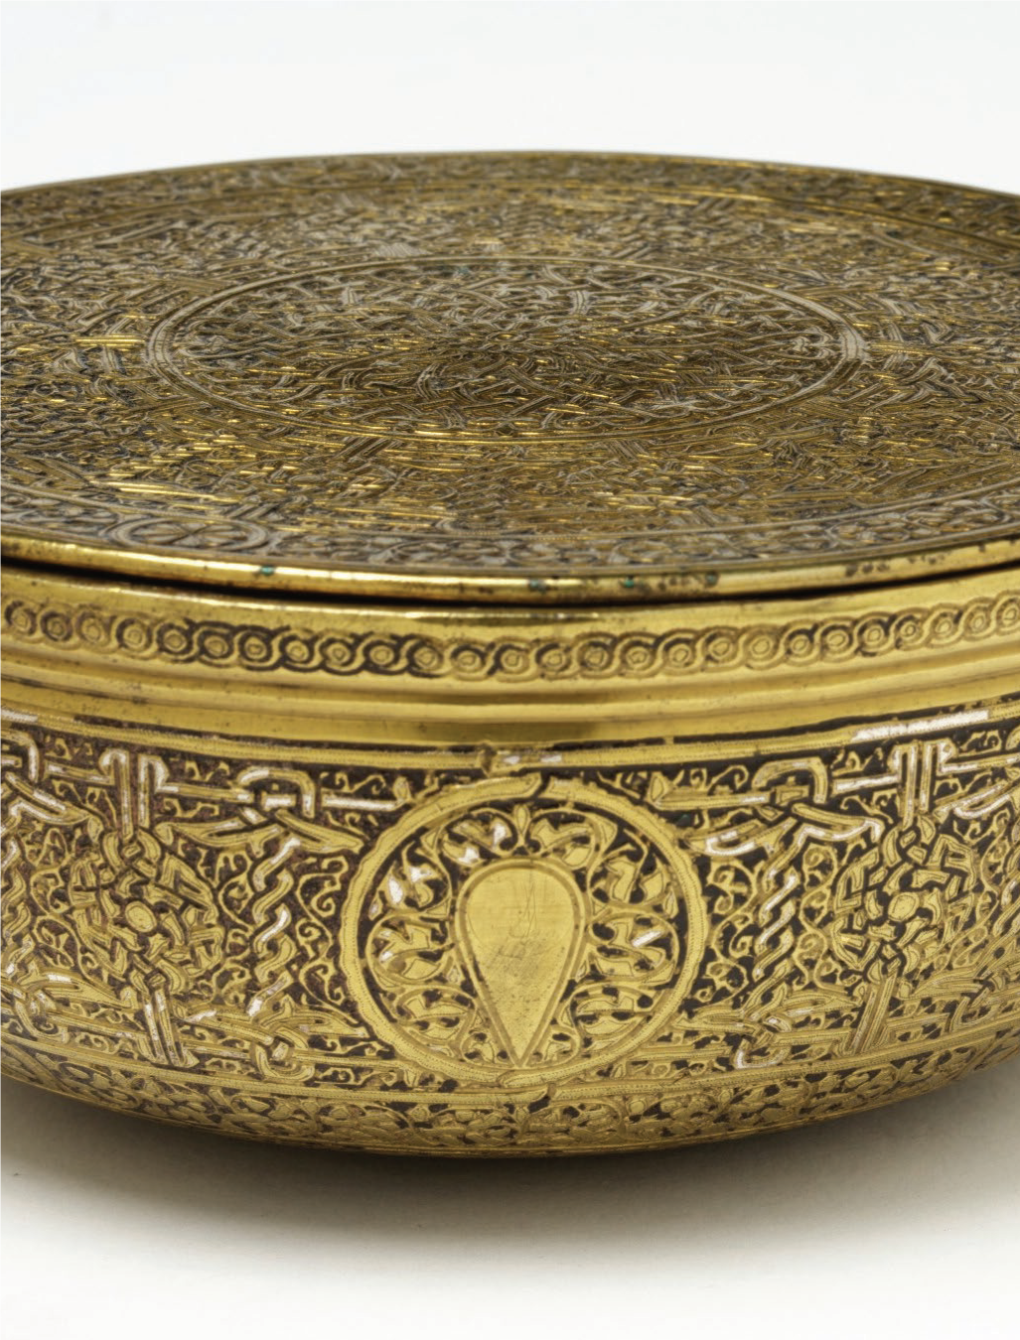 On the Origins and the Meanings of Levantine Objects in Early Modern Venice Elizabeth Rodini